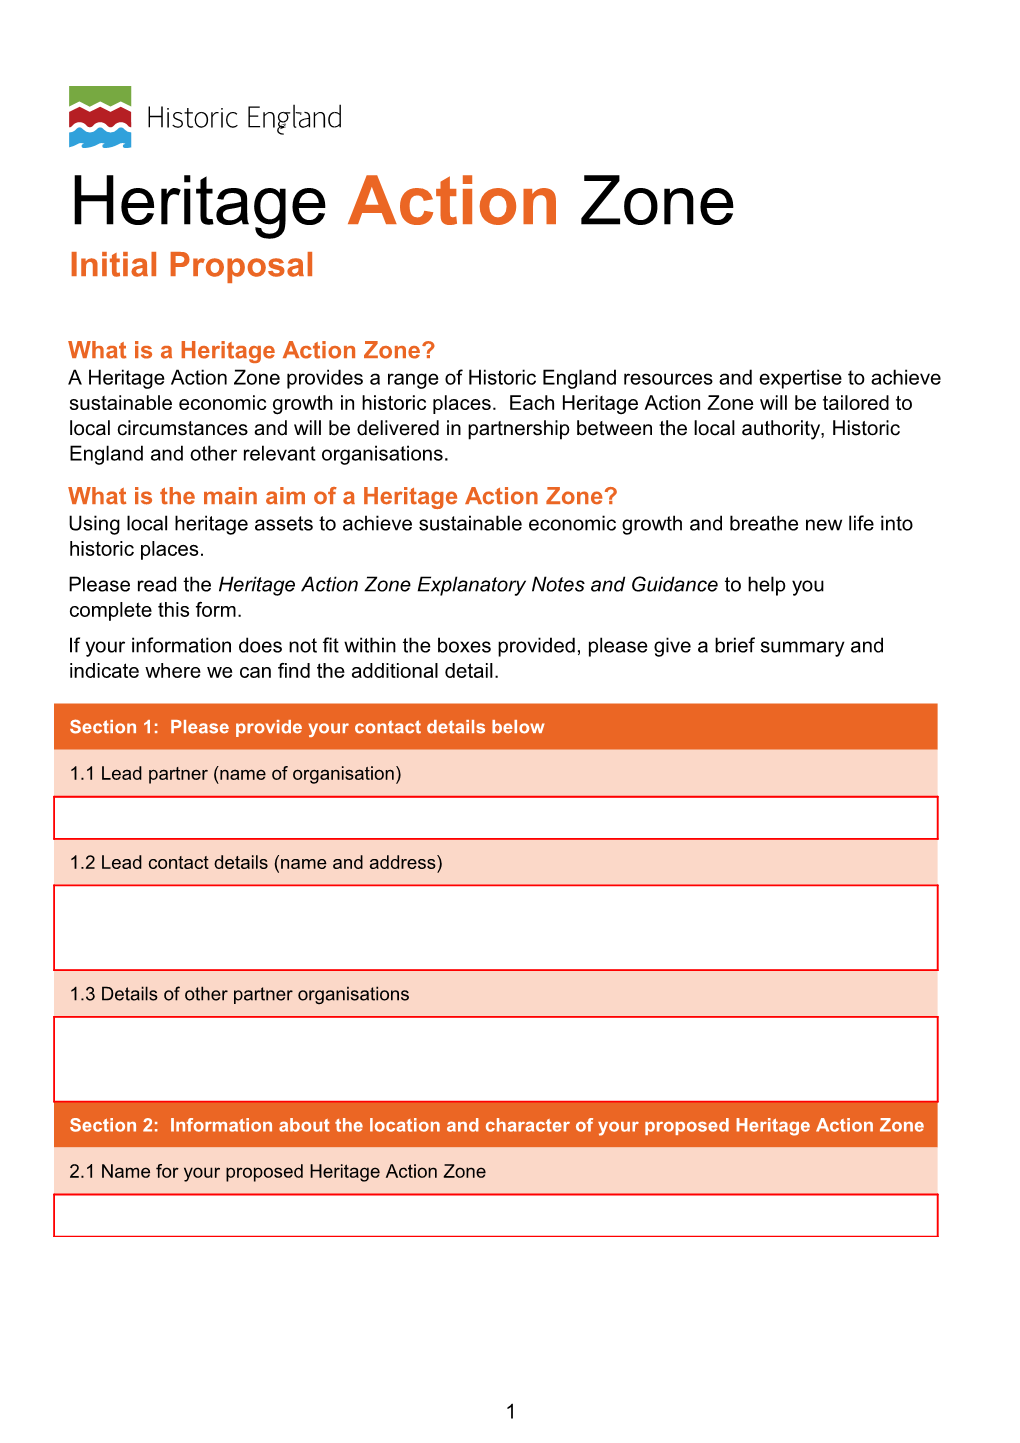 What Is a Heritage Action Zone?